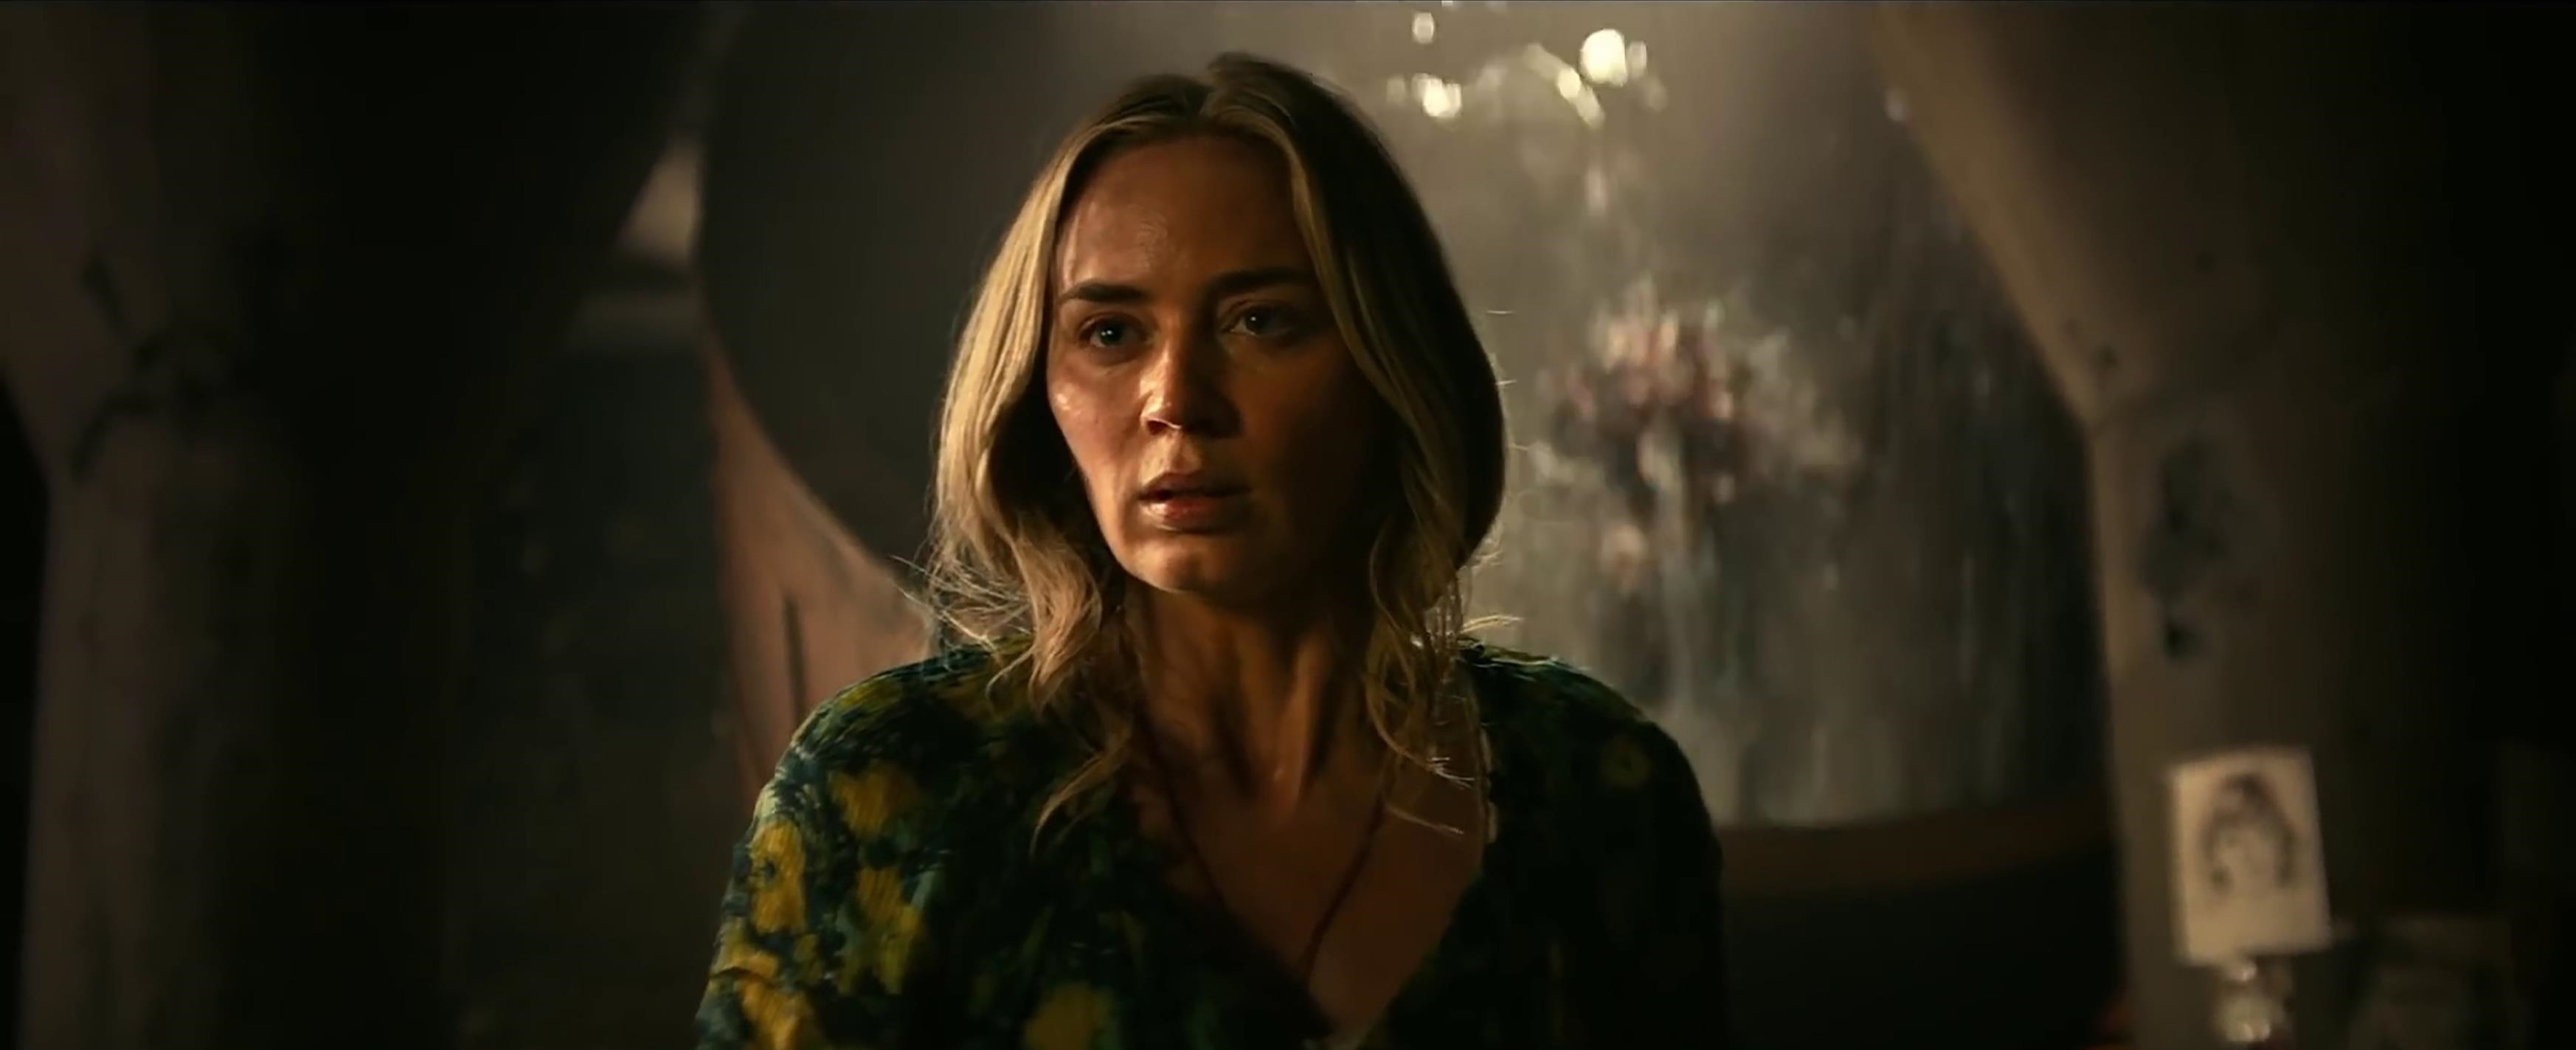 Emily in A Quiet Place Part II, which was directed by her husband